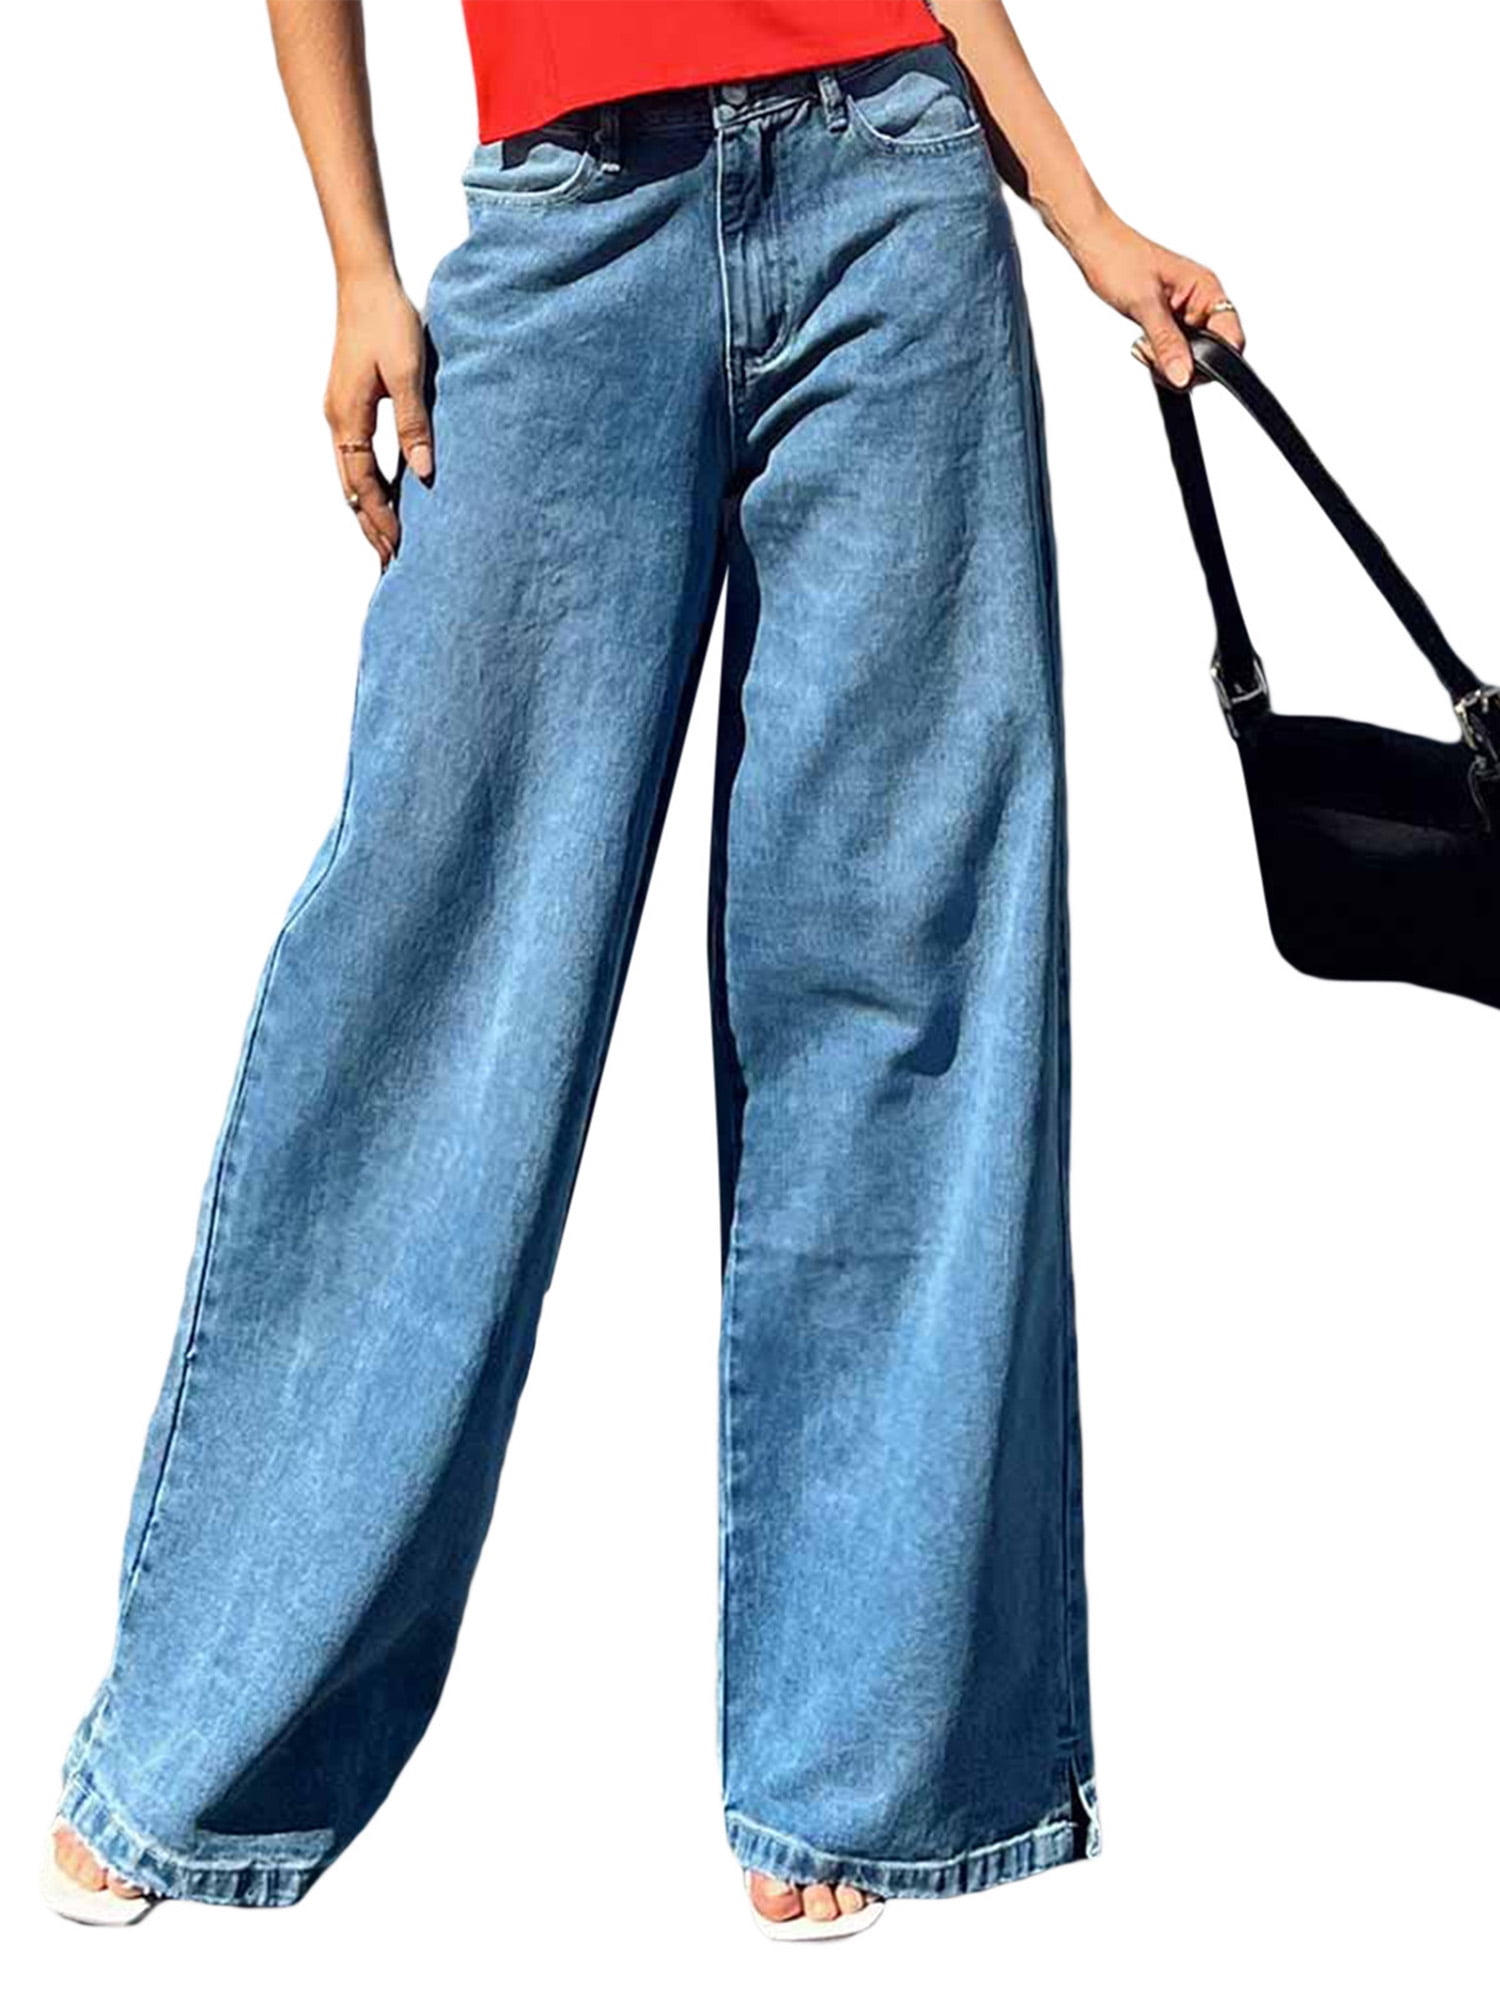 adviicd Jeans For Women 80s Pants for Women Women's Imitation Denim High  Waist Trouser Loose Thickened Warm Womens Clothes for Travel 